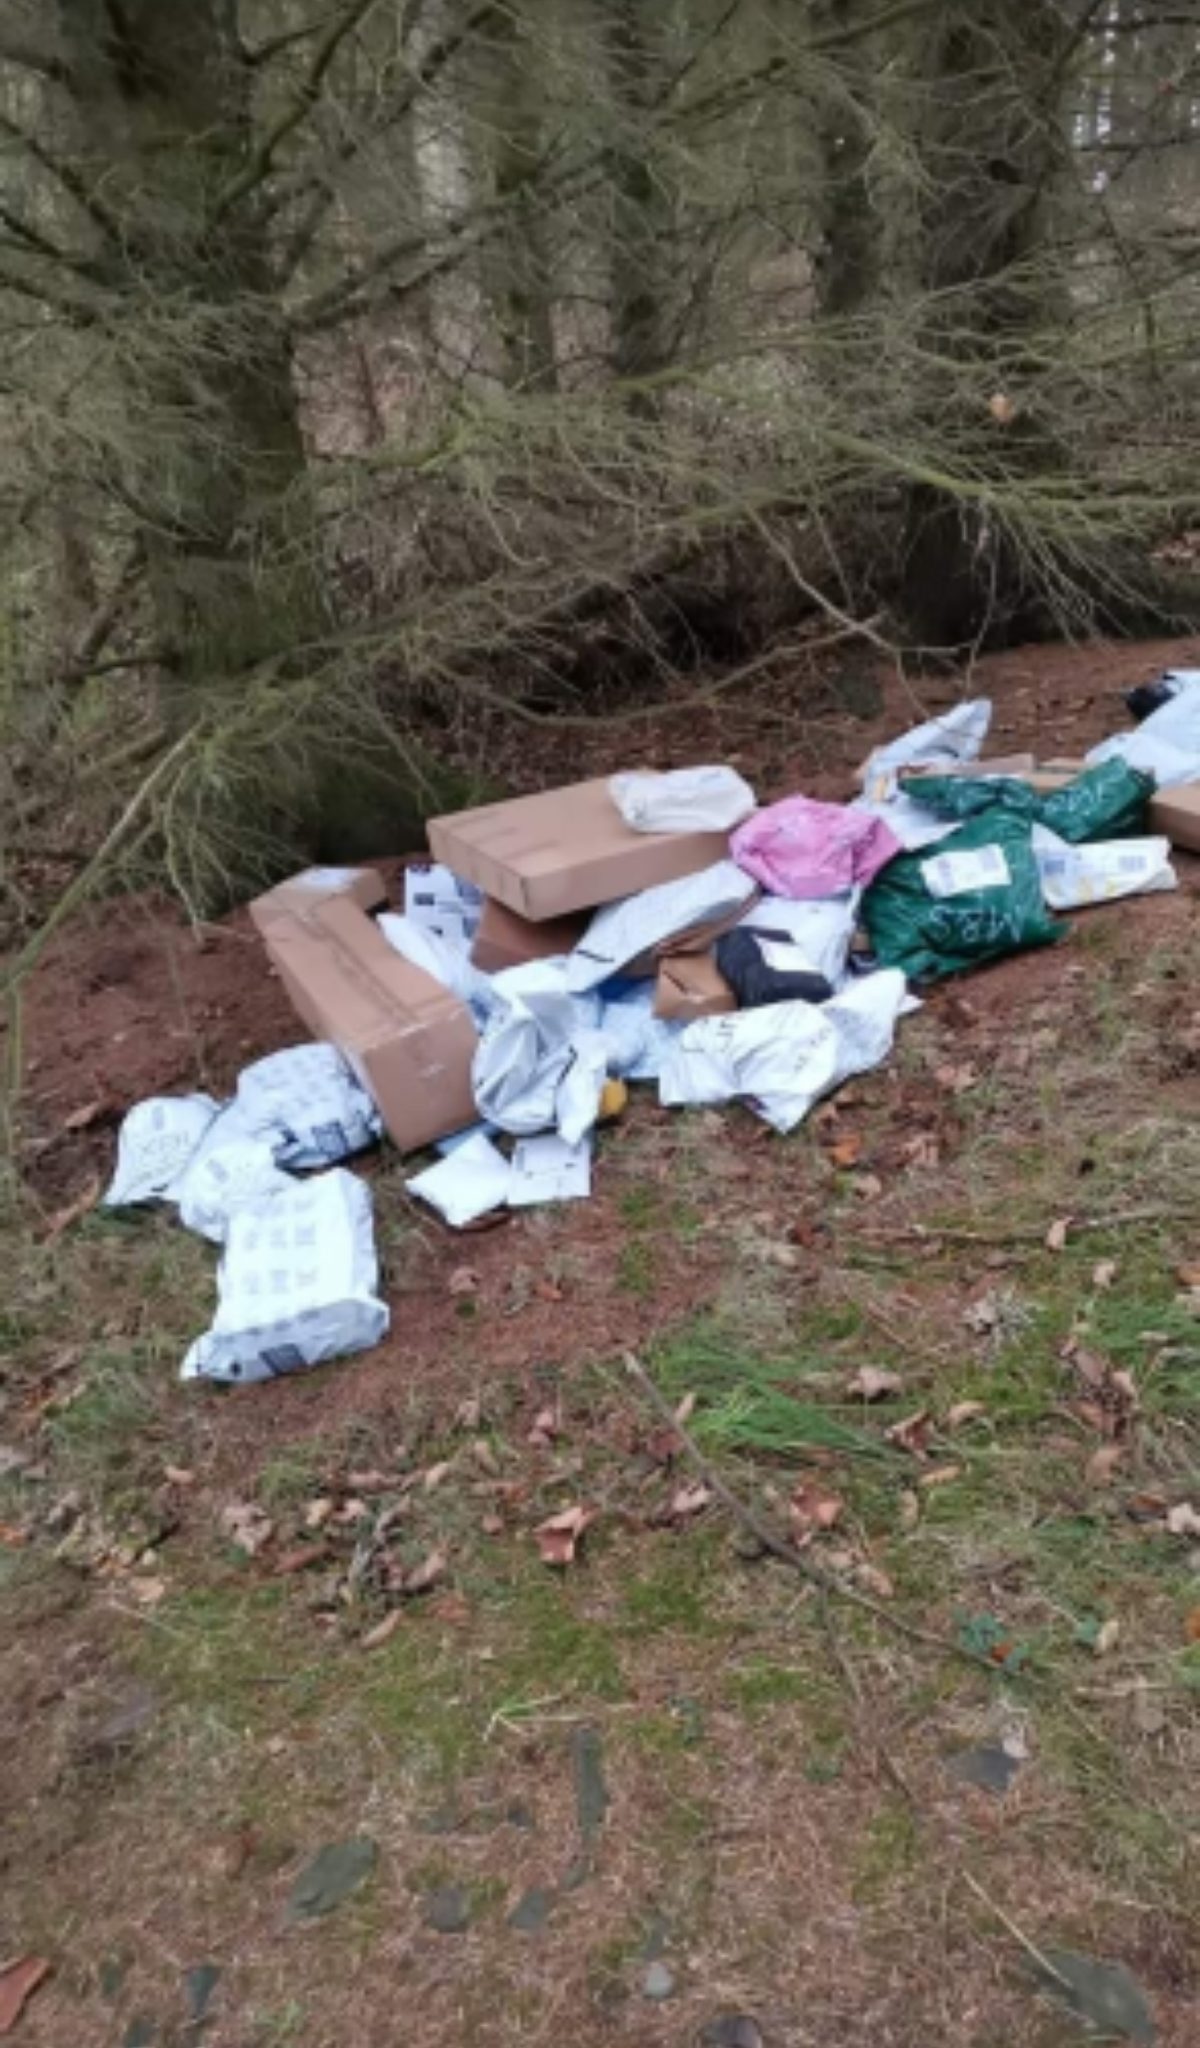 Pile of parcels abandoned in the woods.